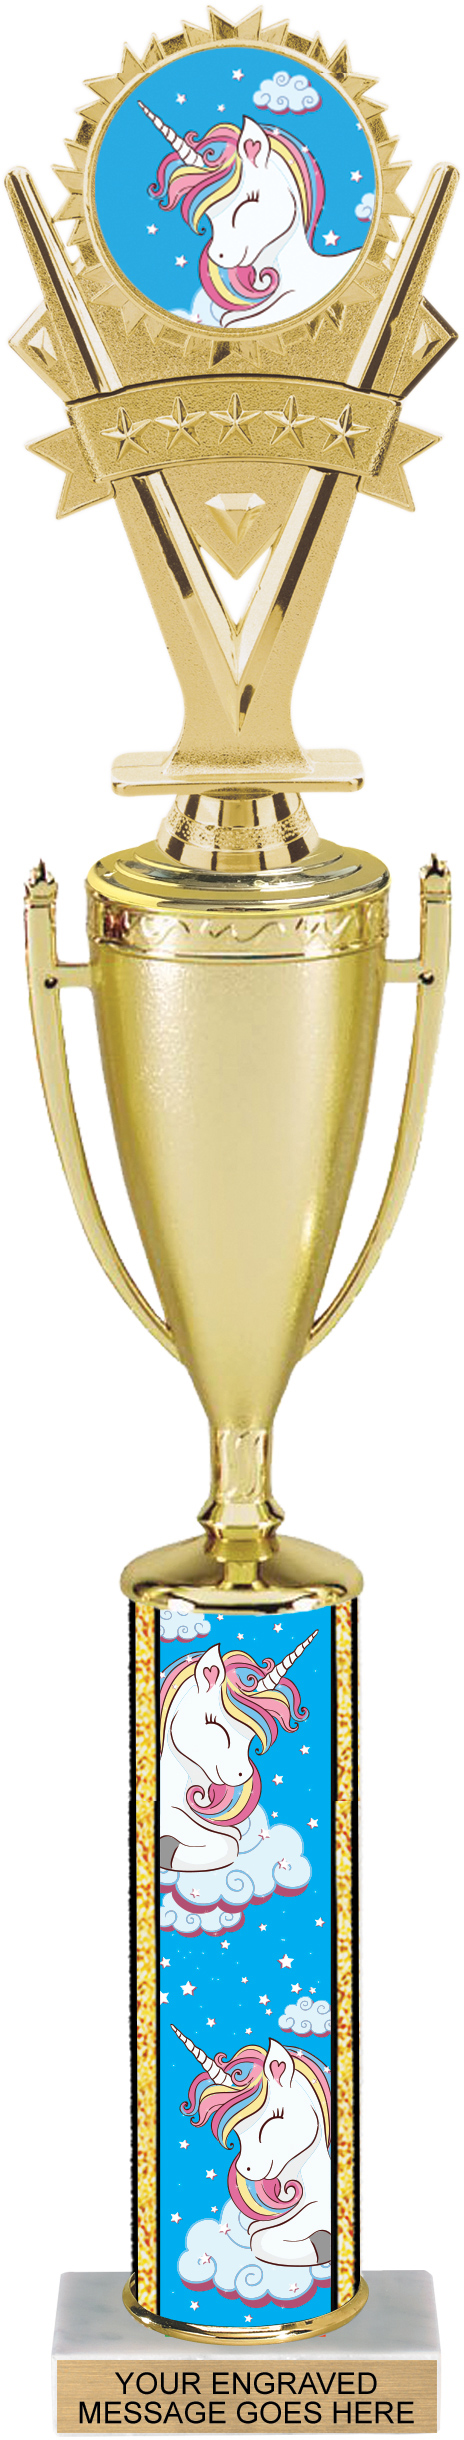 Exclusive Unicorn Cup Insert Trophy - 17 inch